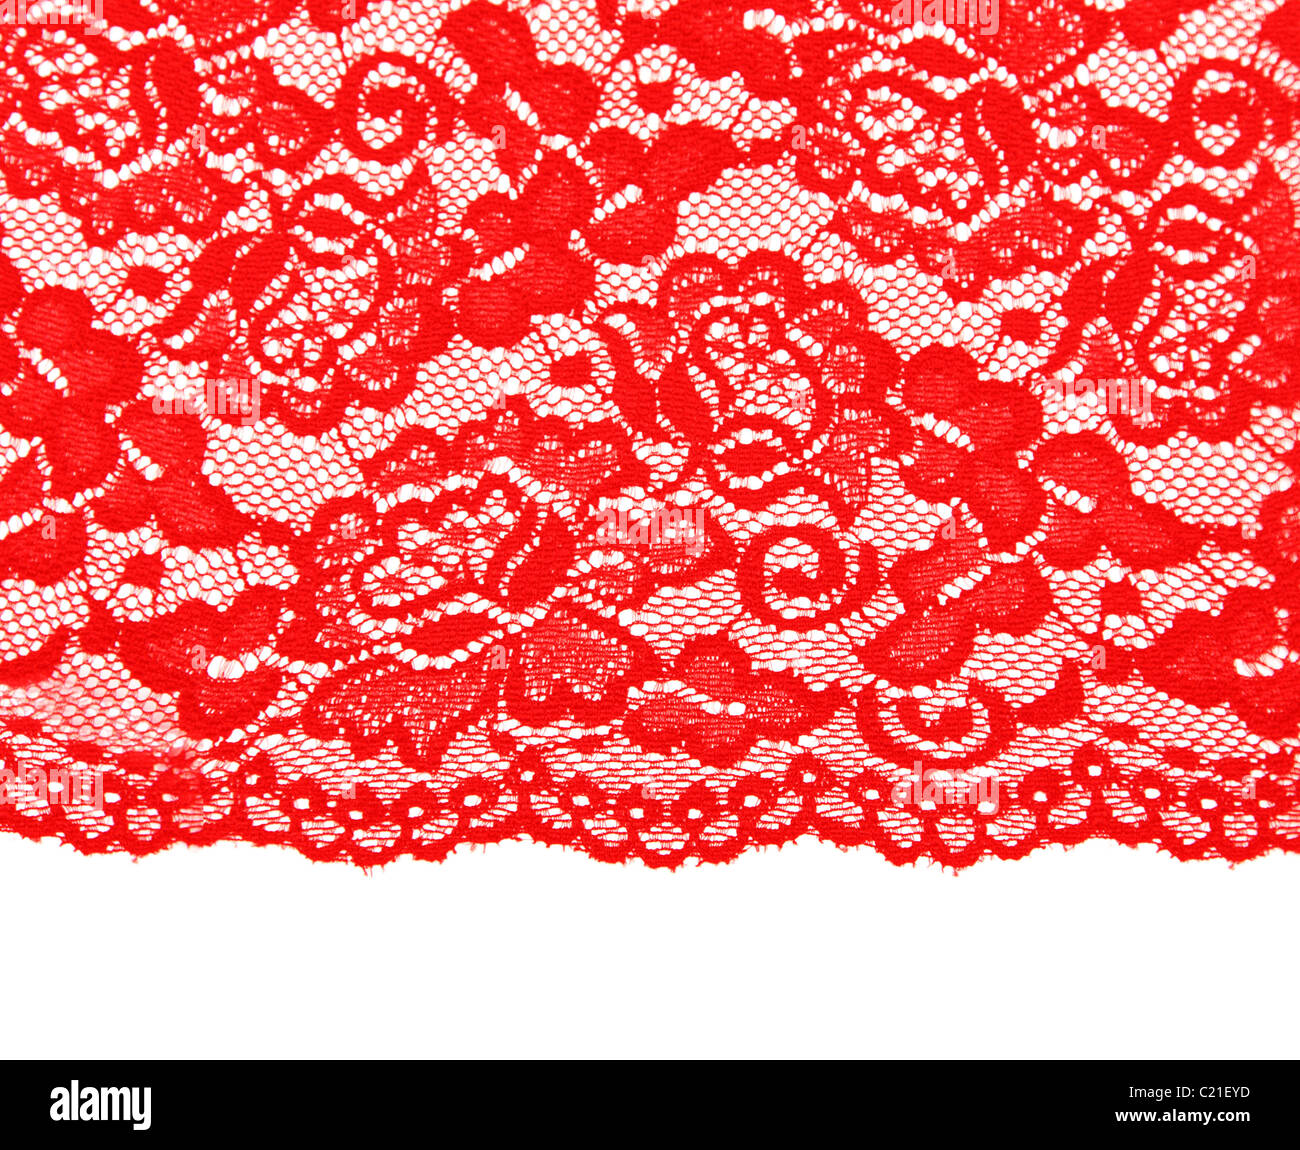 https://c8.alamy.com/comp/C21EYD/red-lace-with-pattern-with-form-flower-on-white-background-C21EYD.jpg